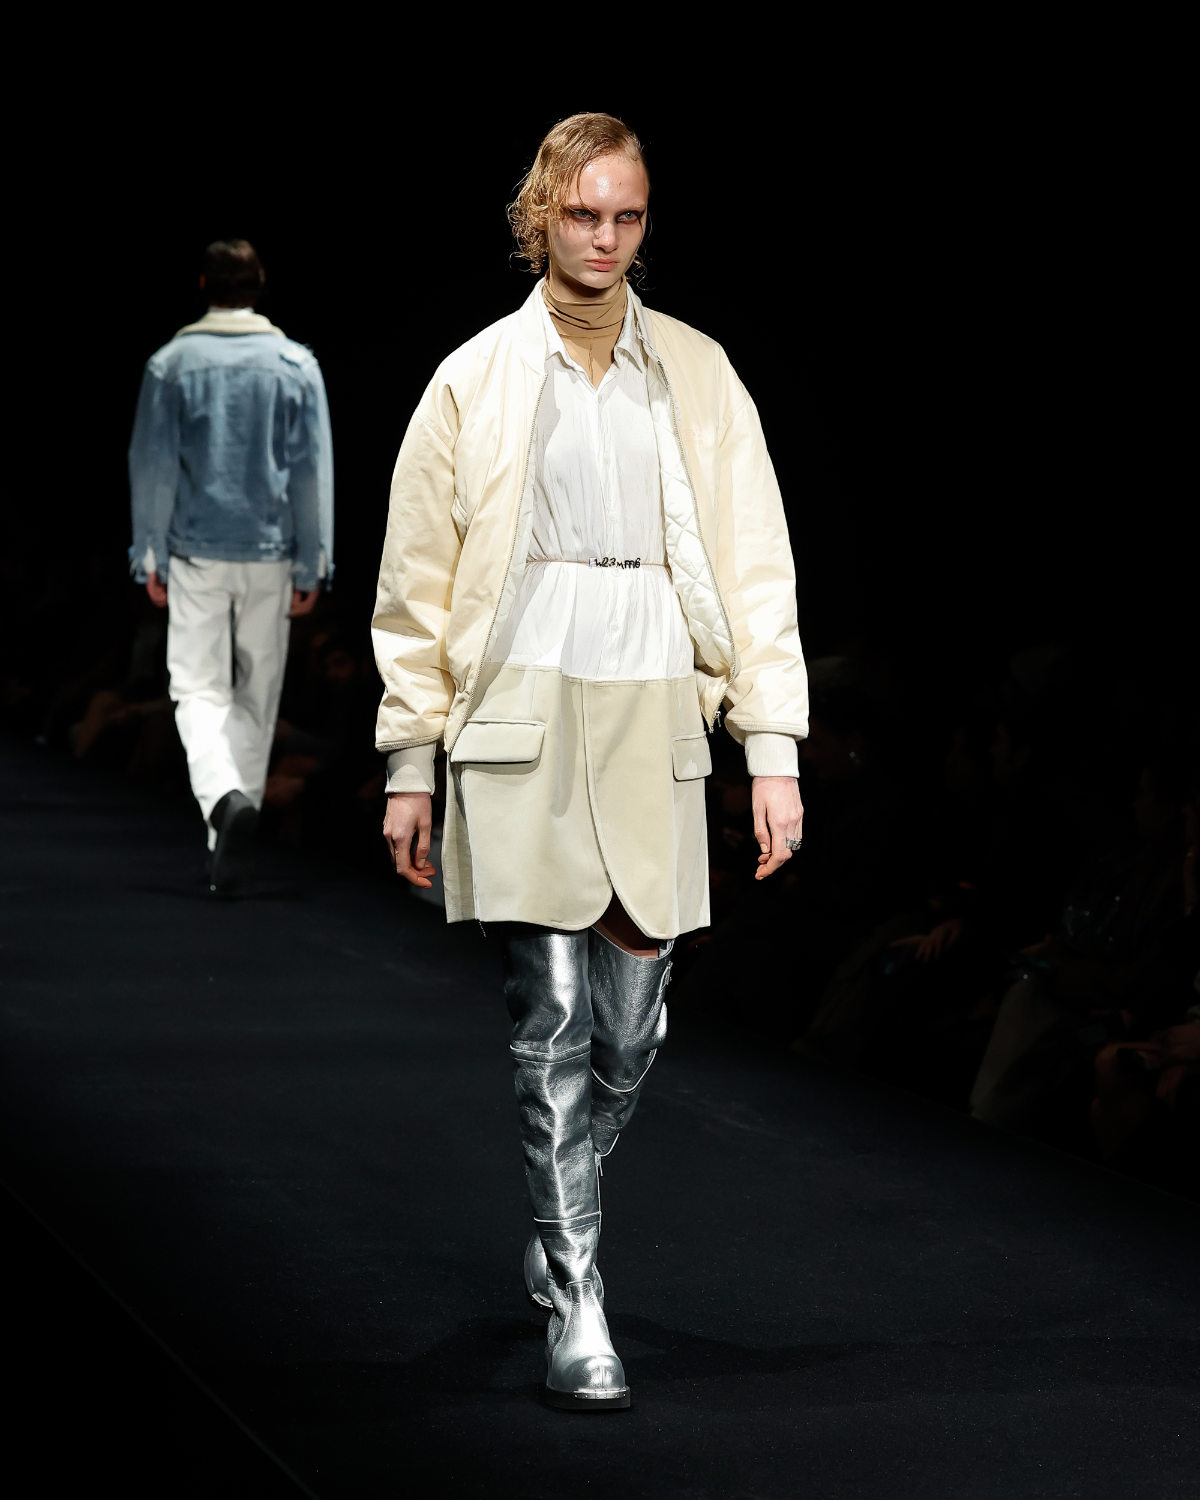 MM6 Maison Margiela Presents Its New Autumn-Winter 2023 Collection